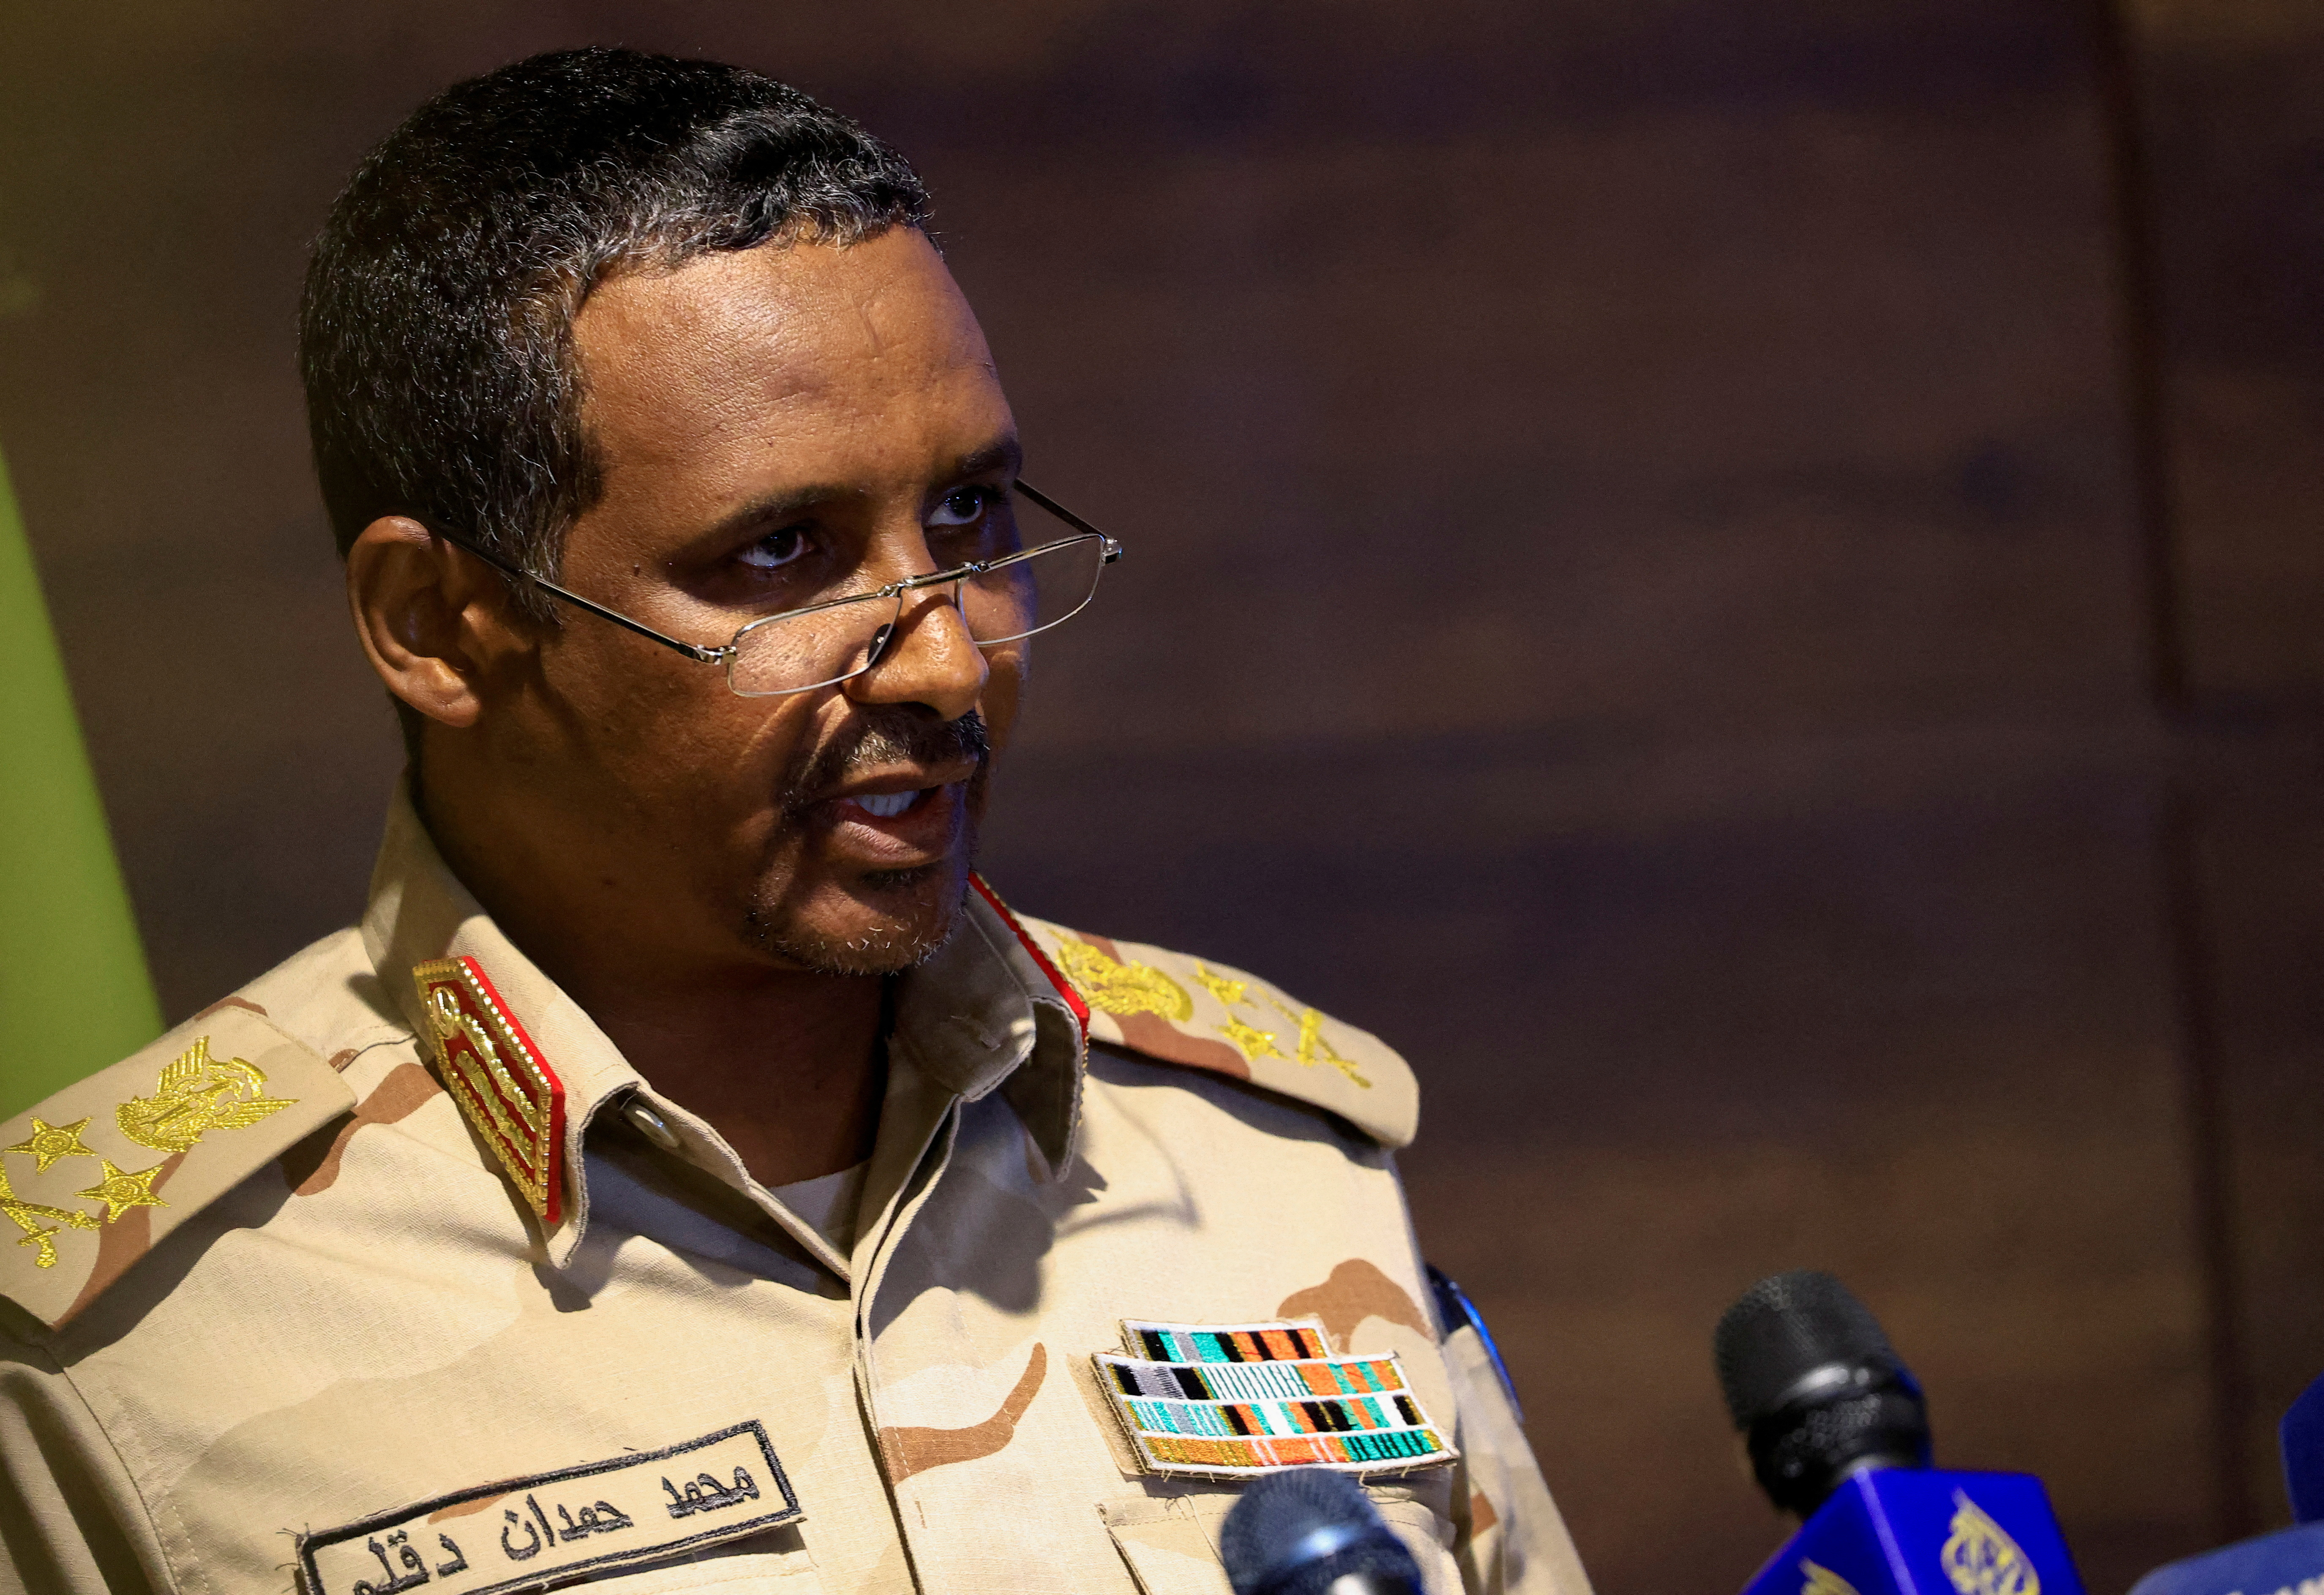 Deputy head of Sudan's sovereign council General Mohamed Hamdan Dagalo speaks during a press conference in Khartoum